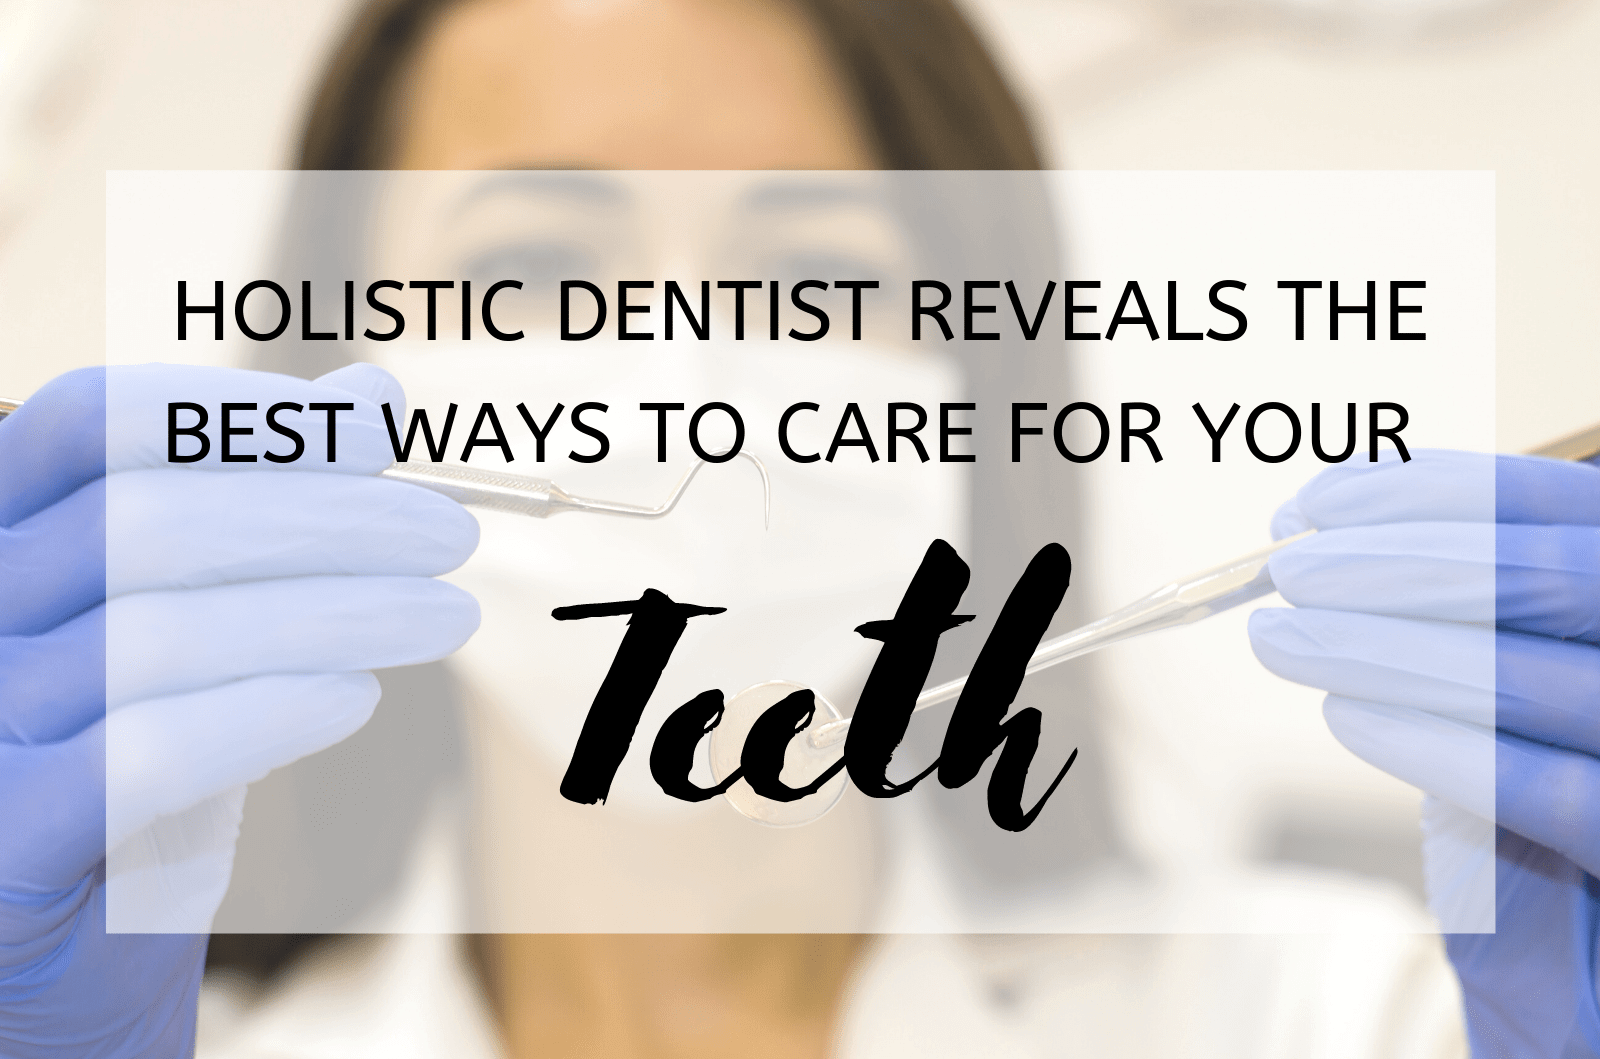 Holistic Dentist Reveals The Best Ways To Care For Your Teeth